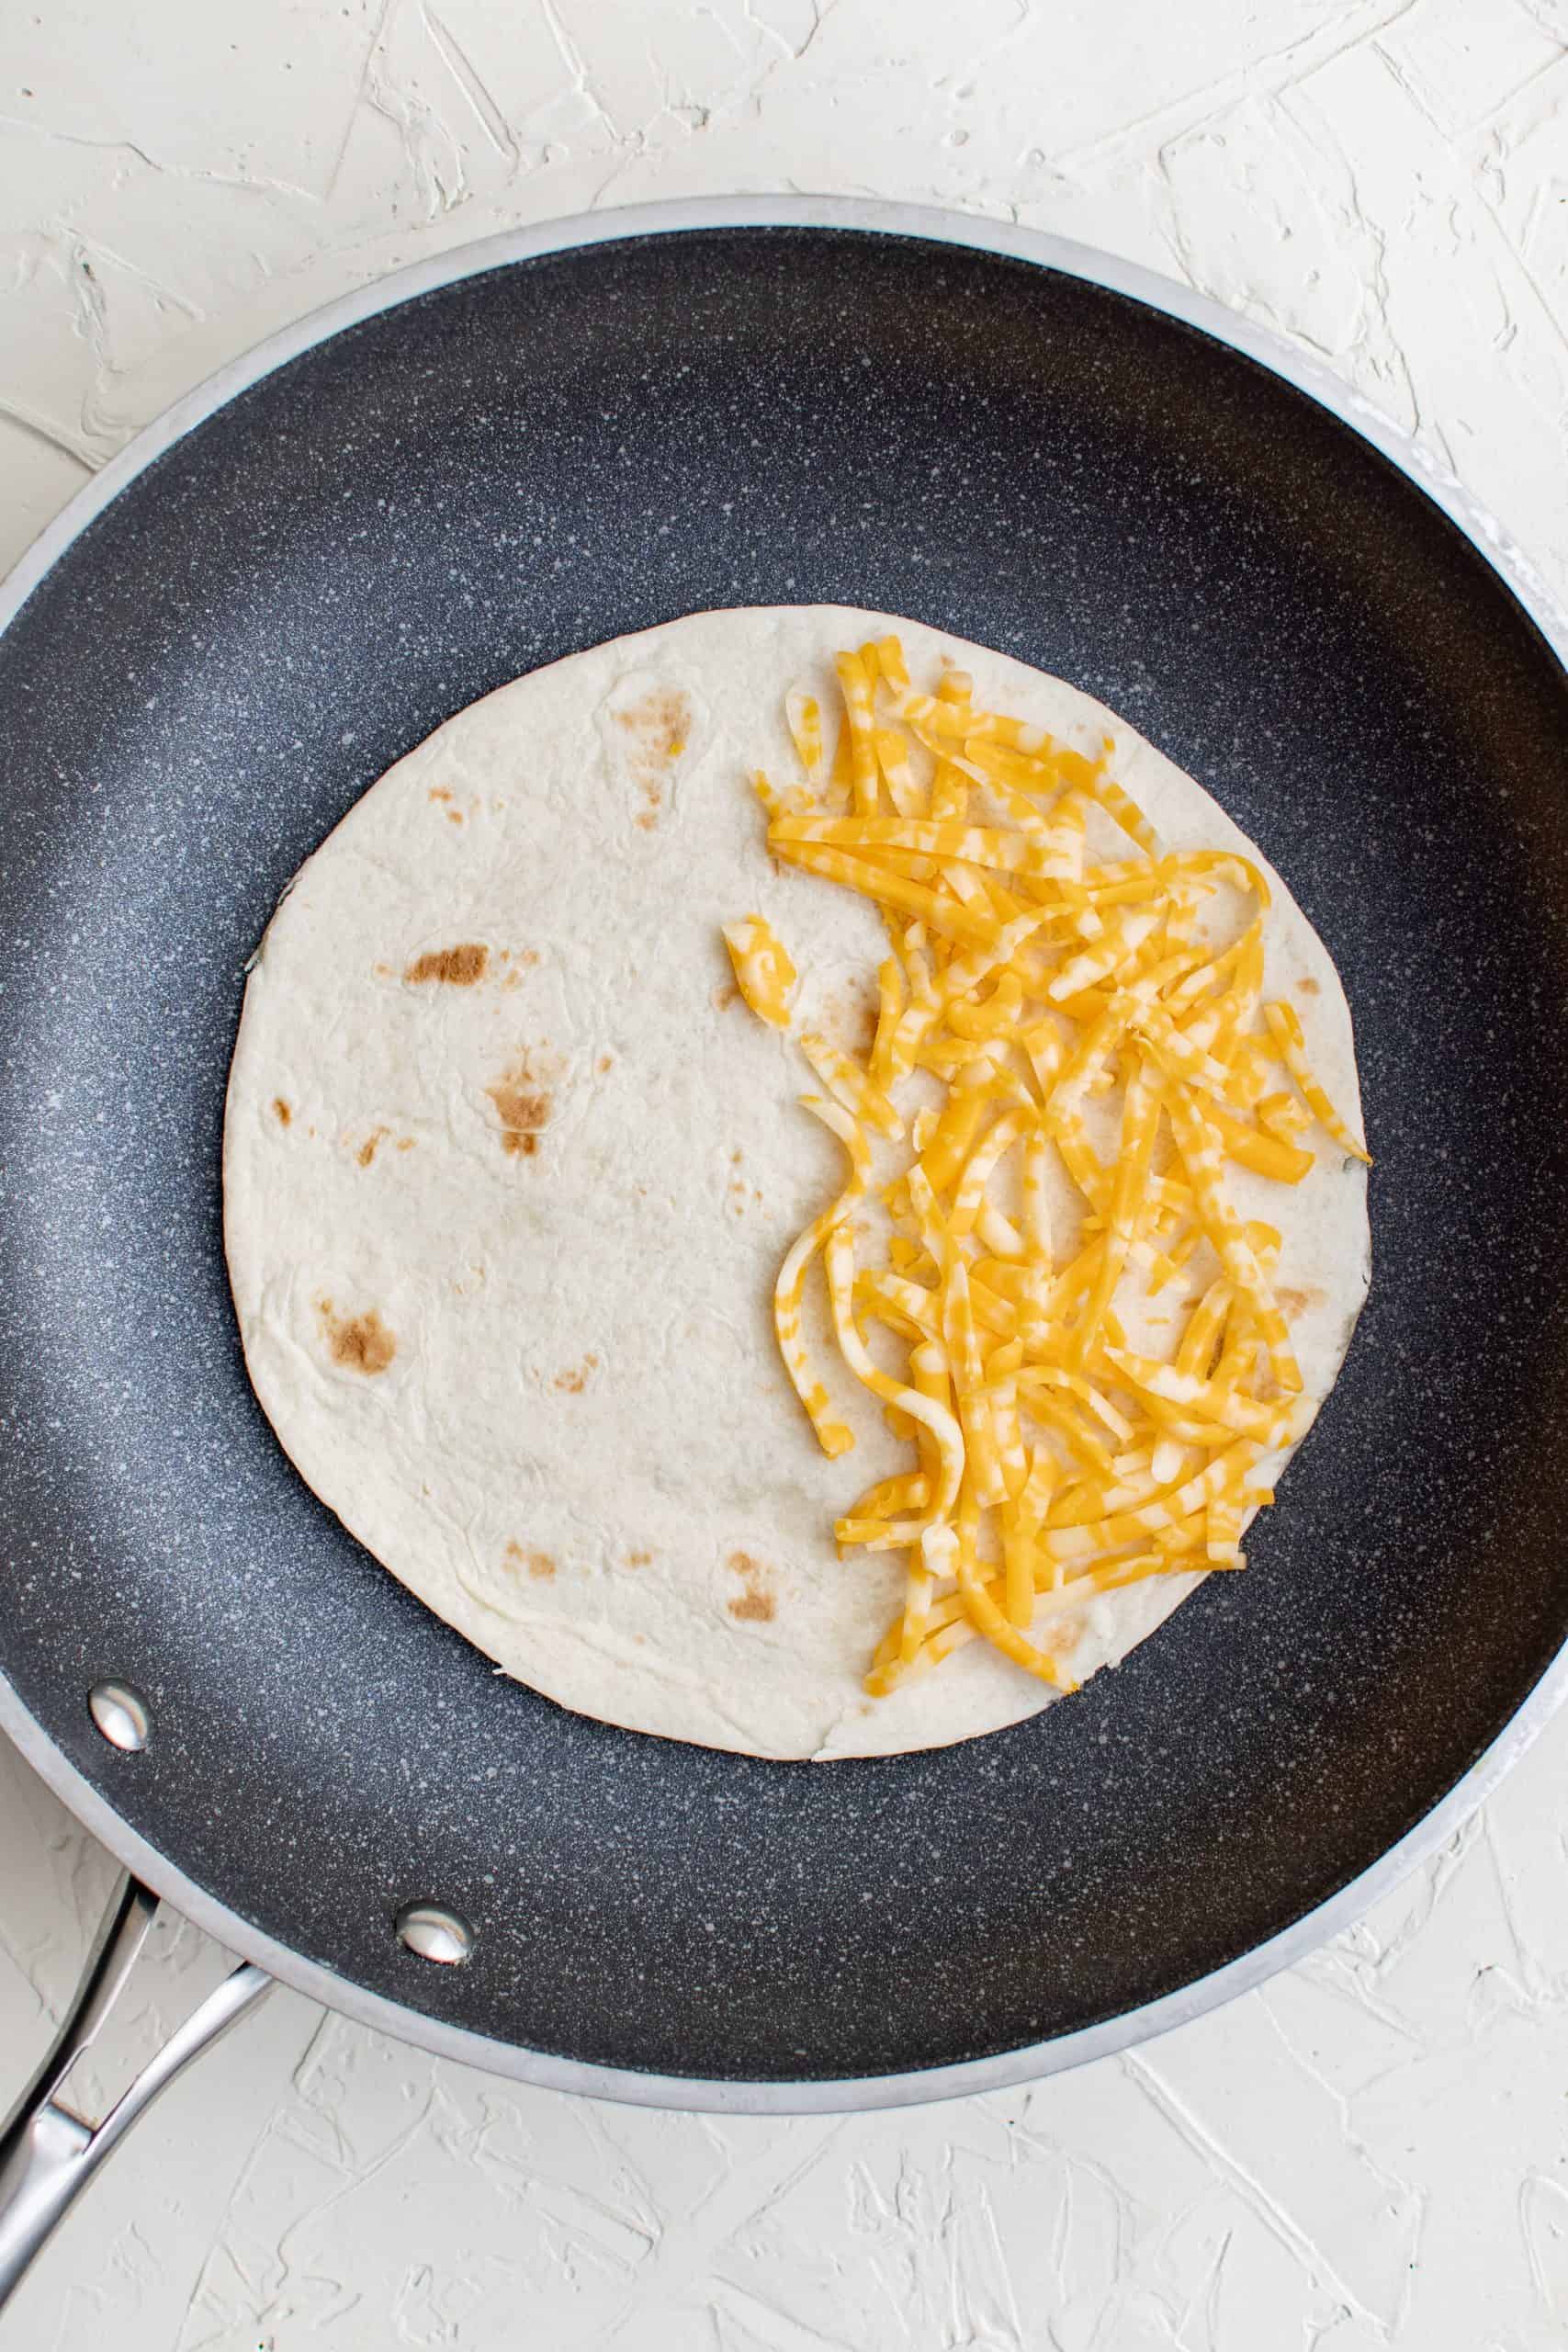 Tortilla added to pan topped with cheese on one side.